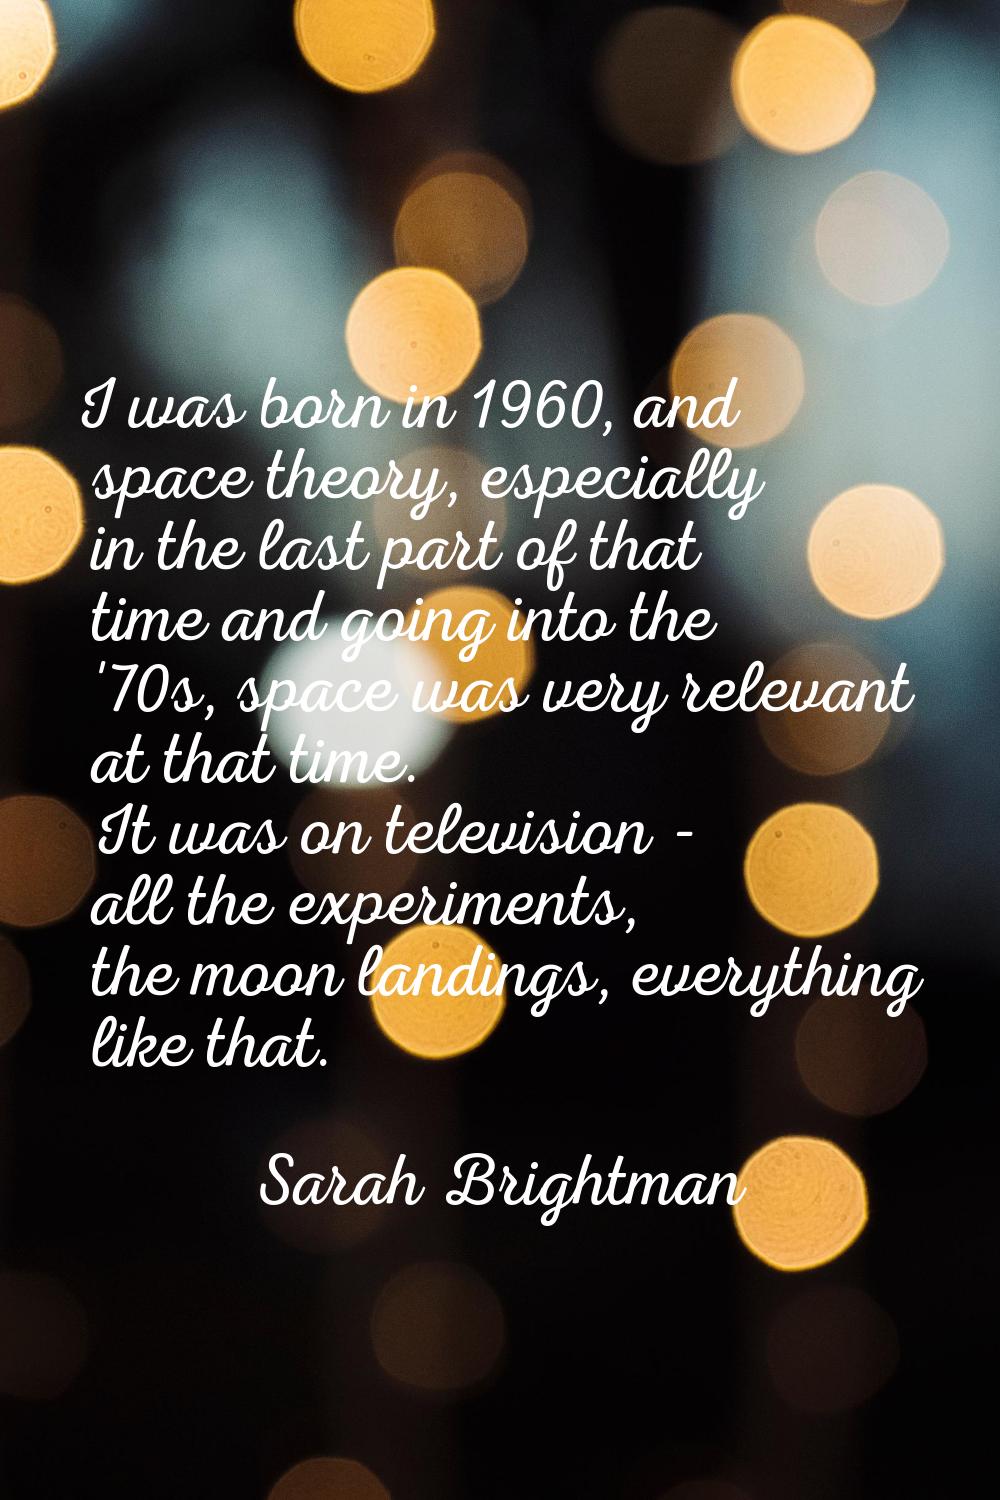 I was born in 1960, and space theory, especially in the last part of that time and going into the '